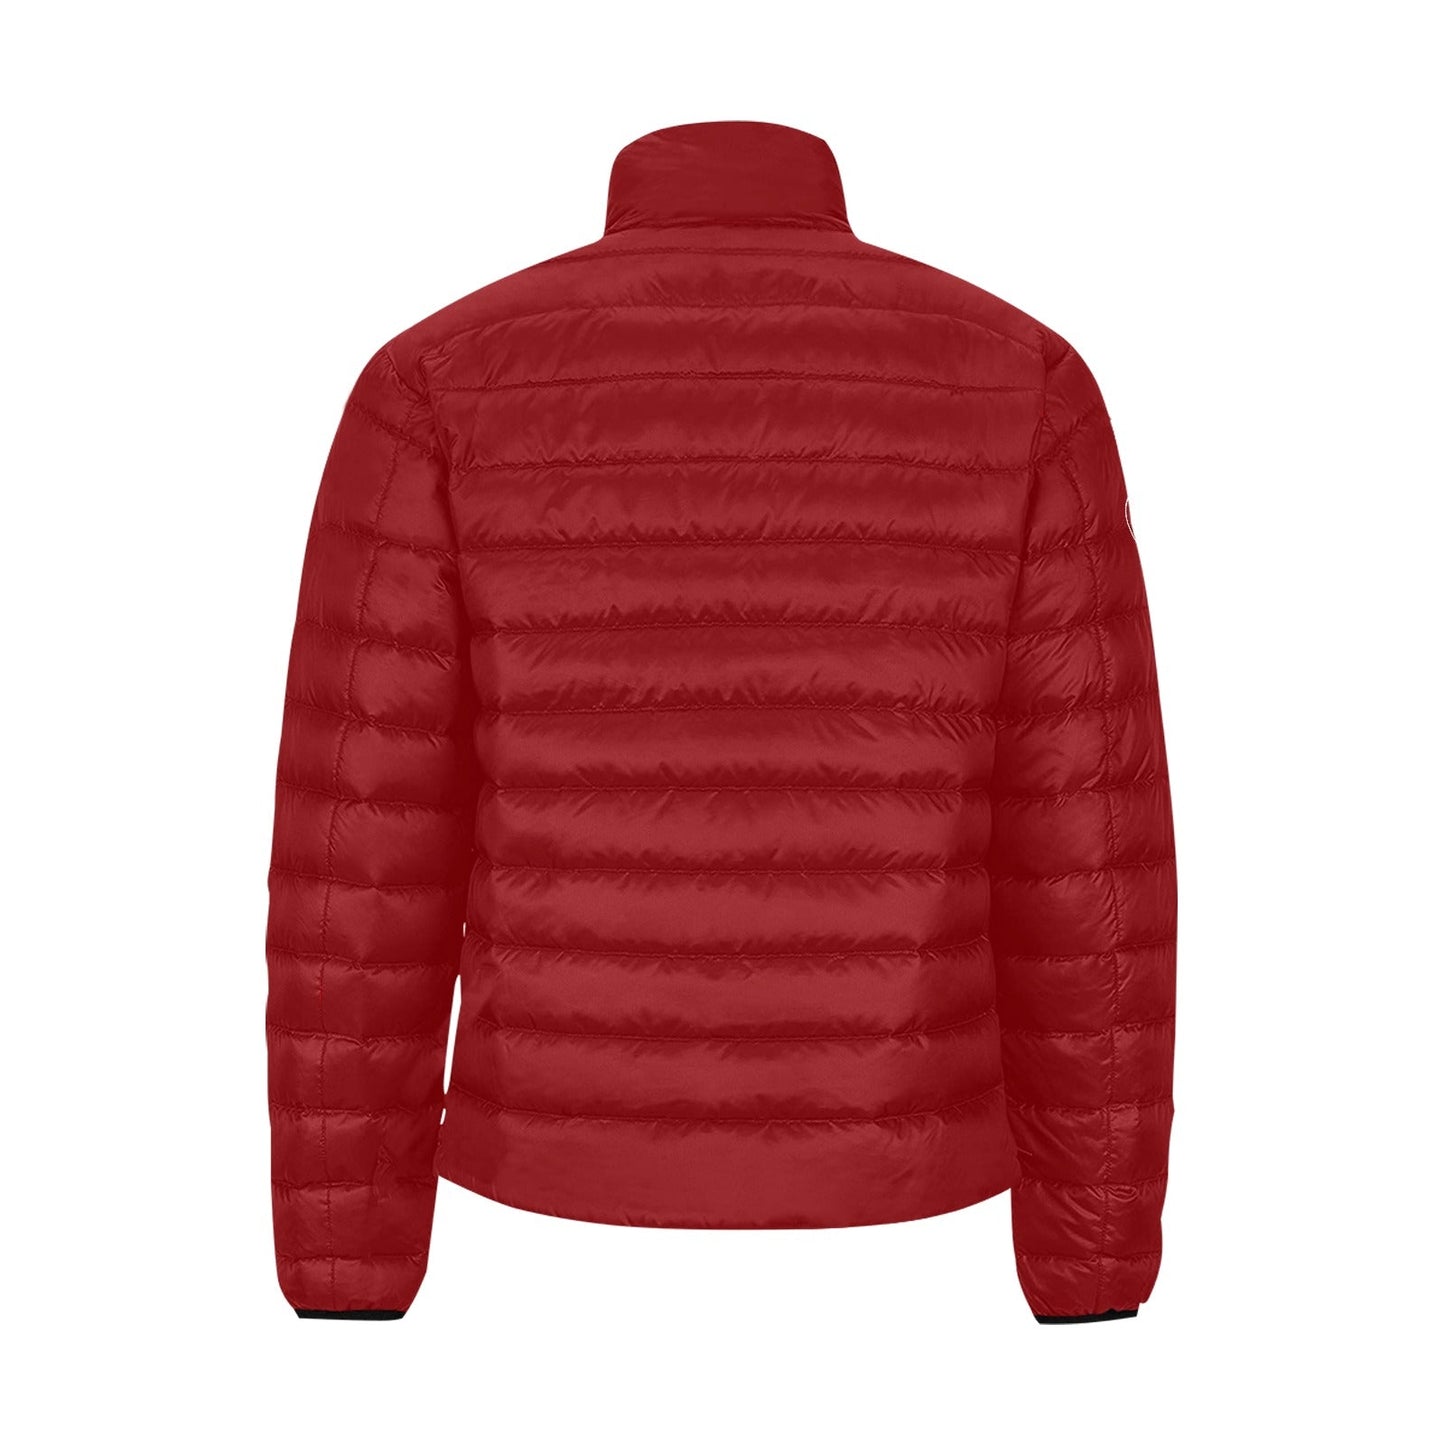 944 Challenge Series Australia official puffer jacket - red